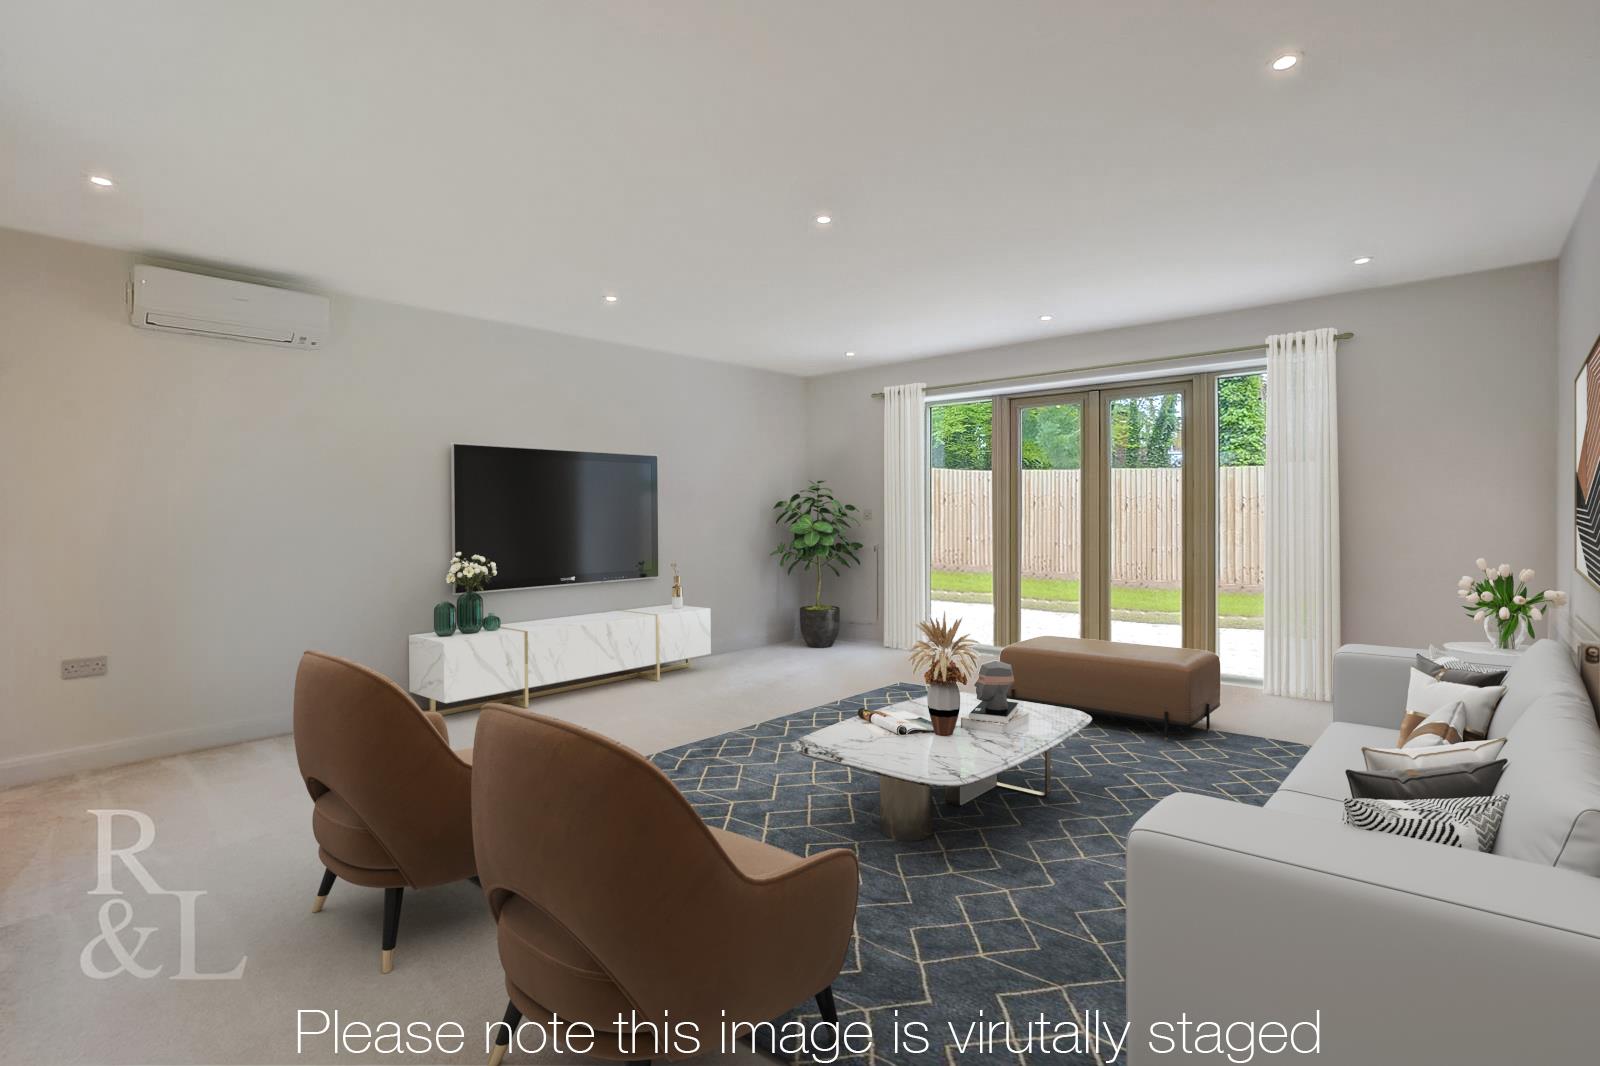 Property image for Bluebell Mews, Blackfordby